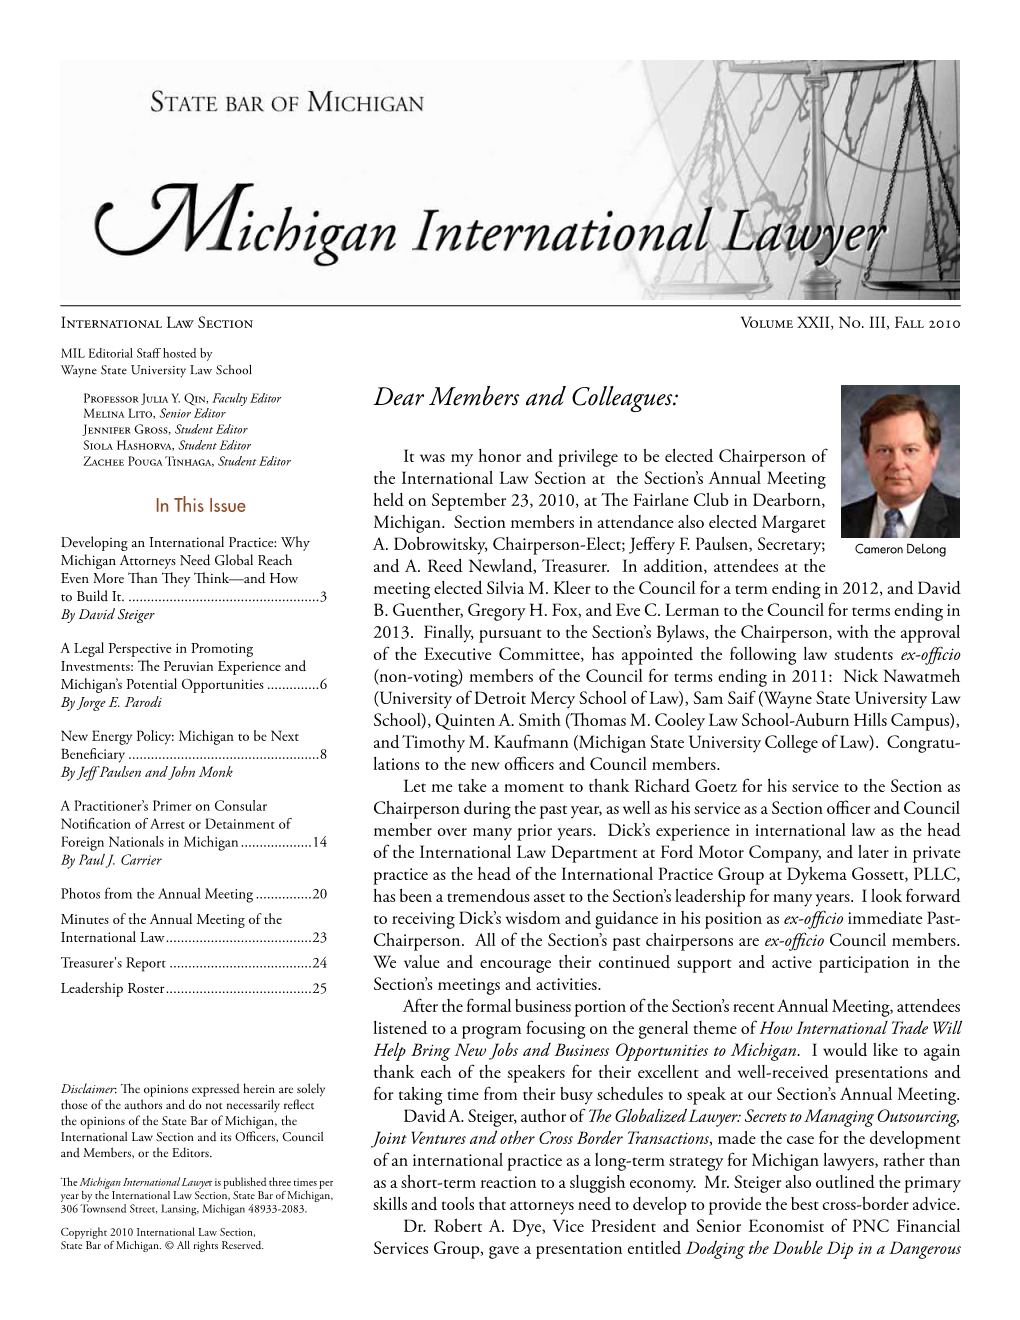 Michigan International Lawyer Is Published Three Times Per As a Short-Term Reaction to a Sluggish Economy